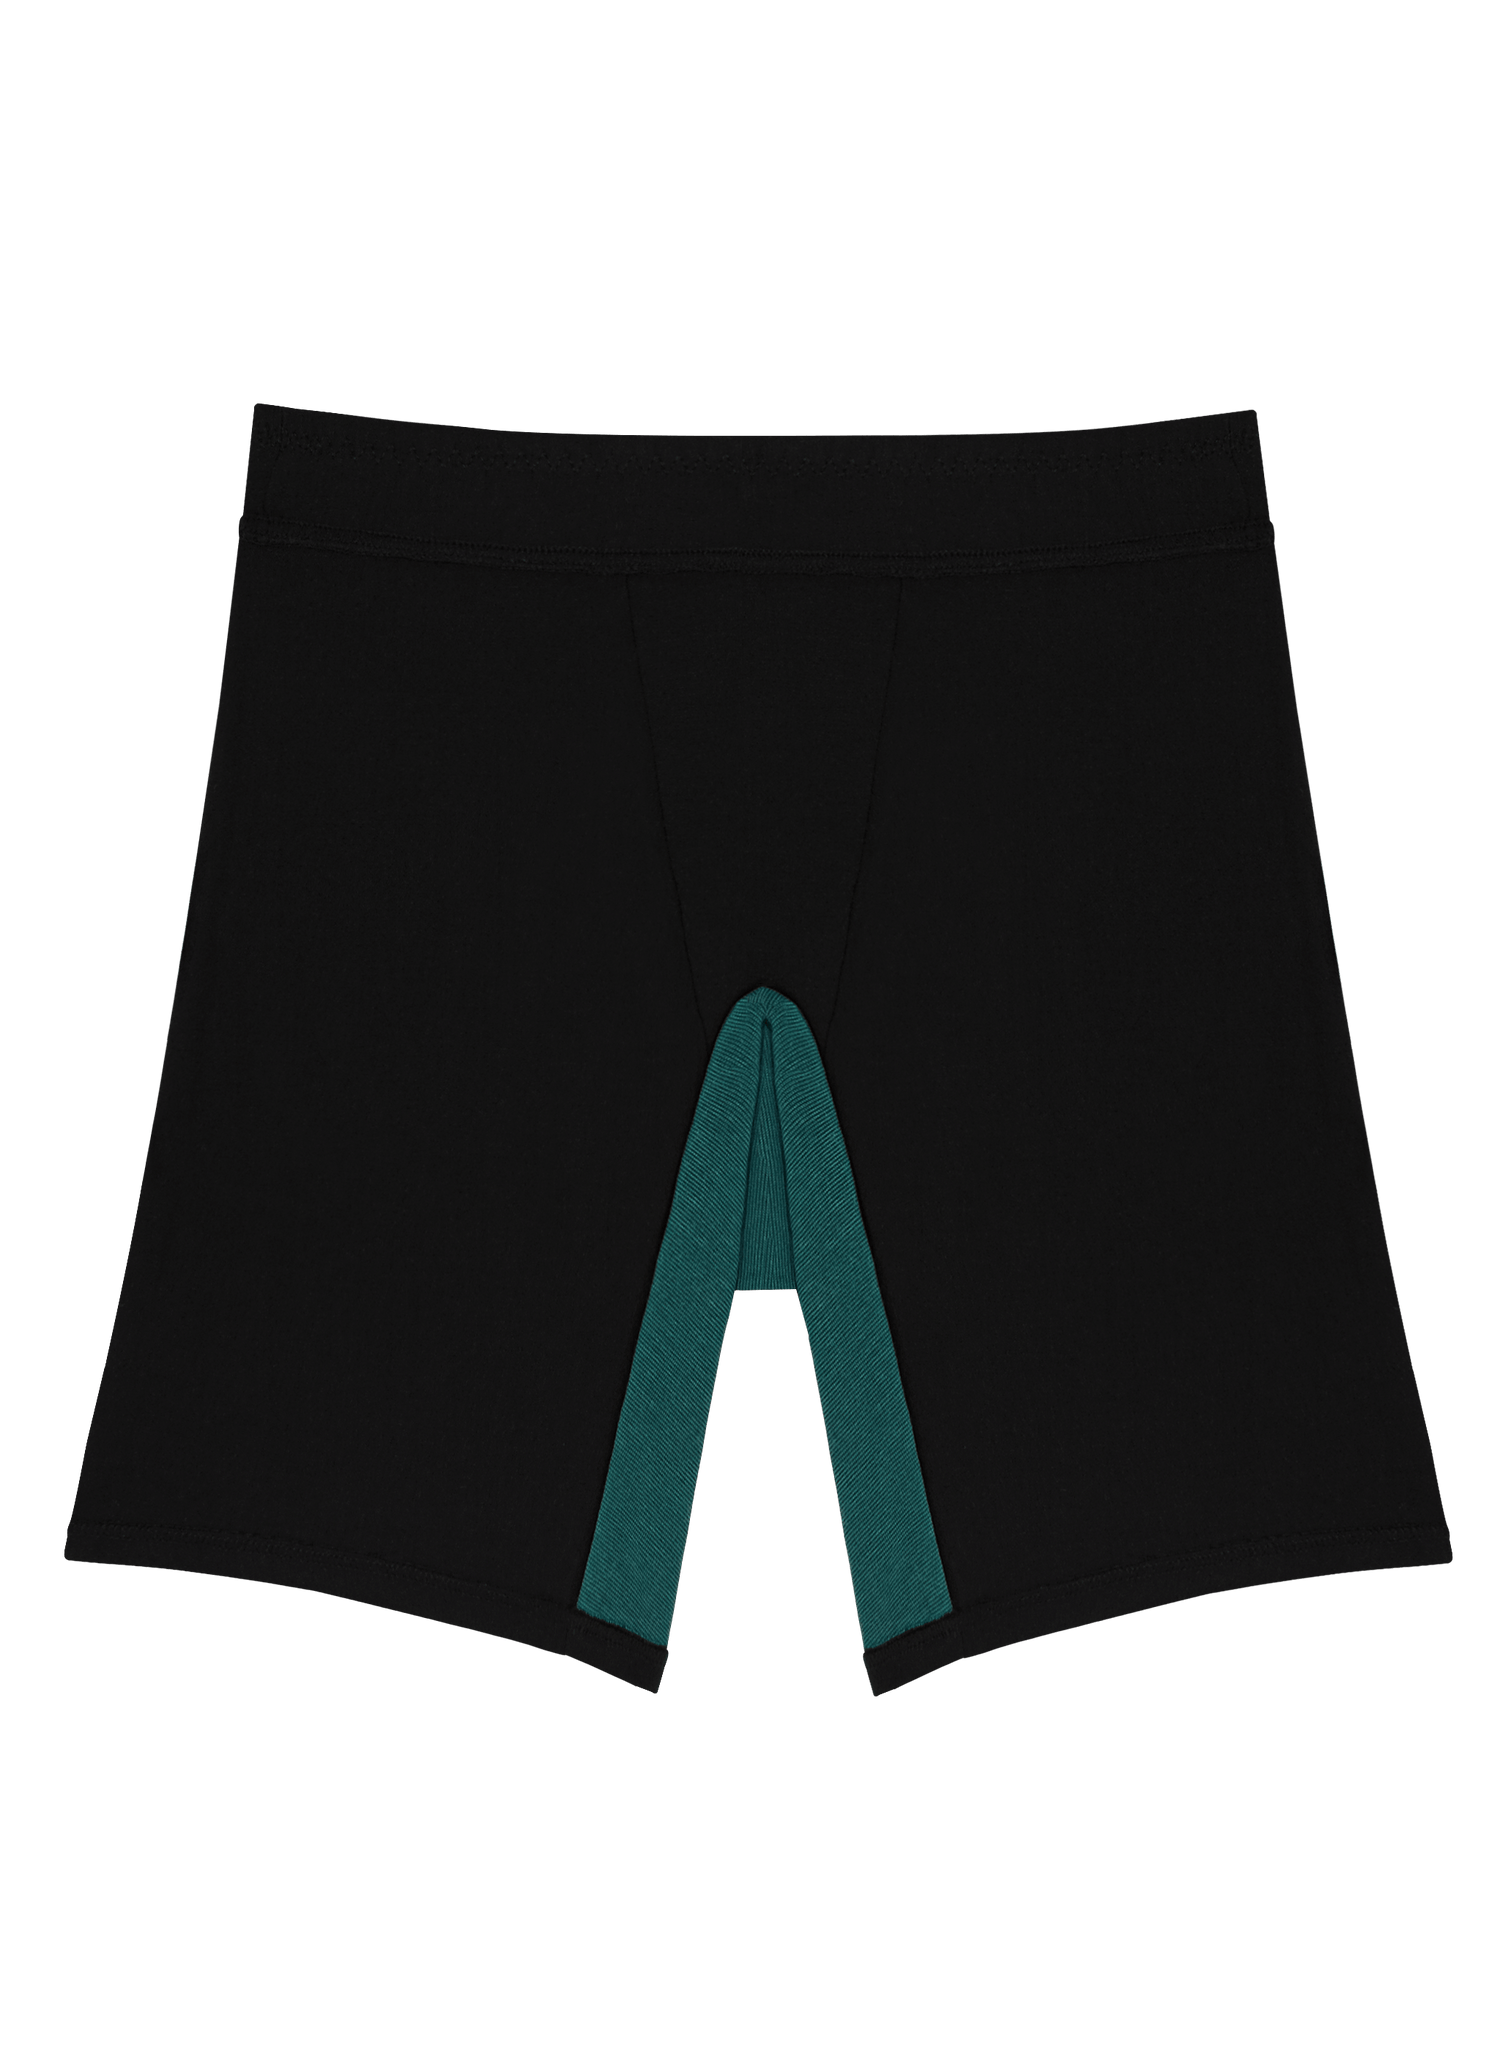 huha underwear feature a seam free gusset infused with soothing